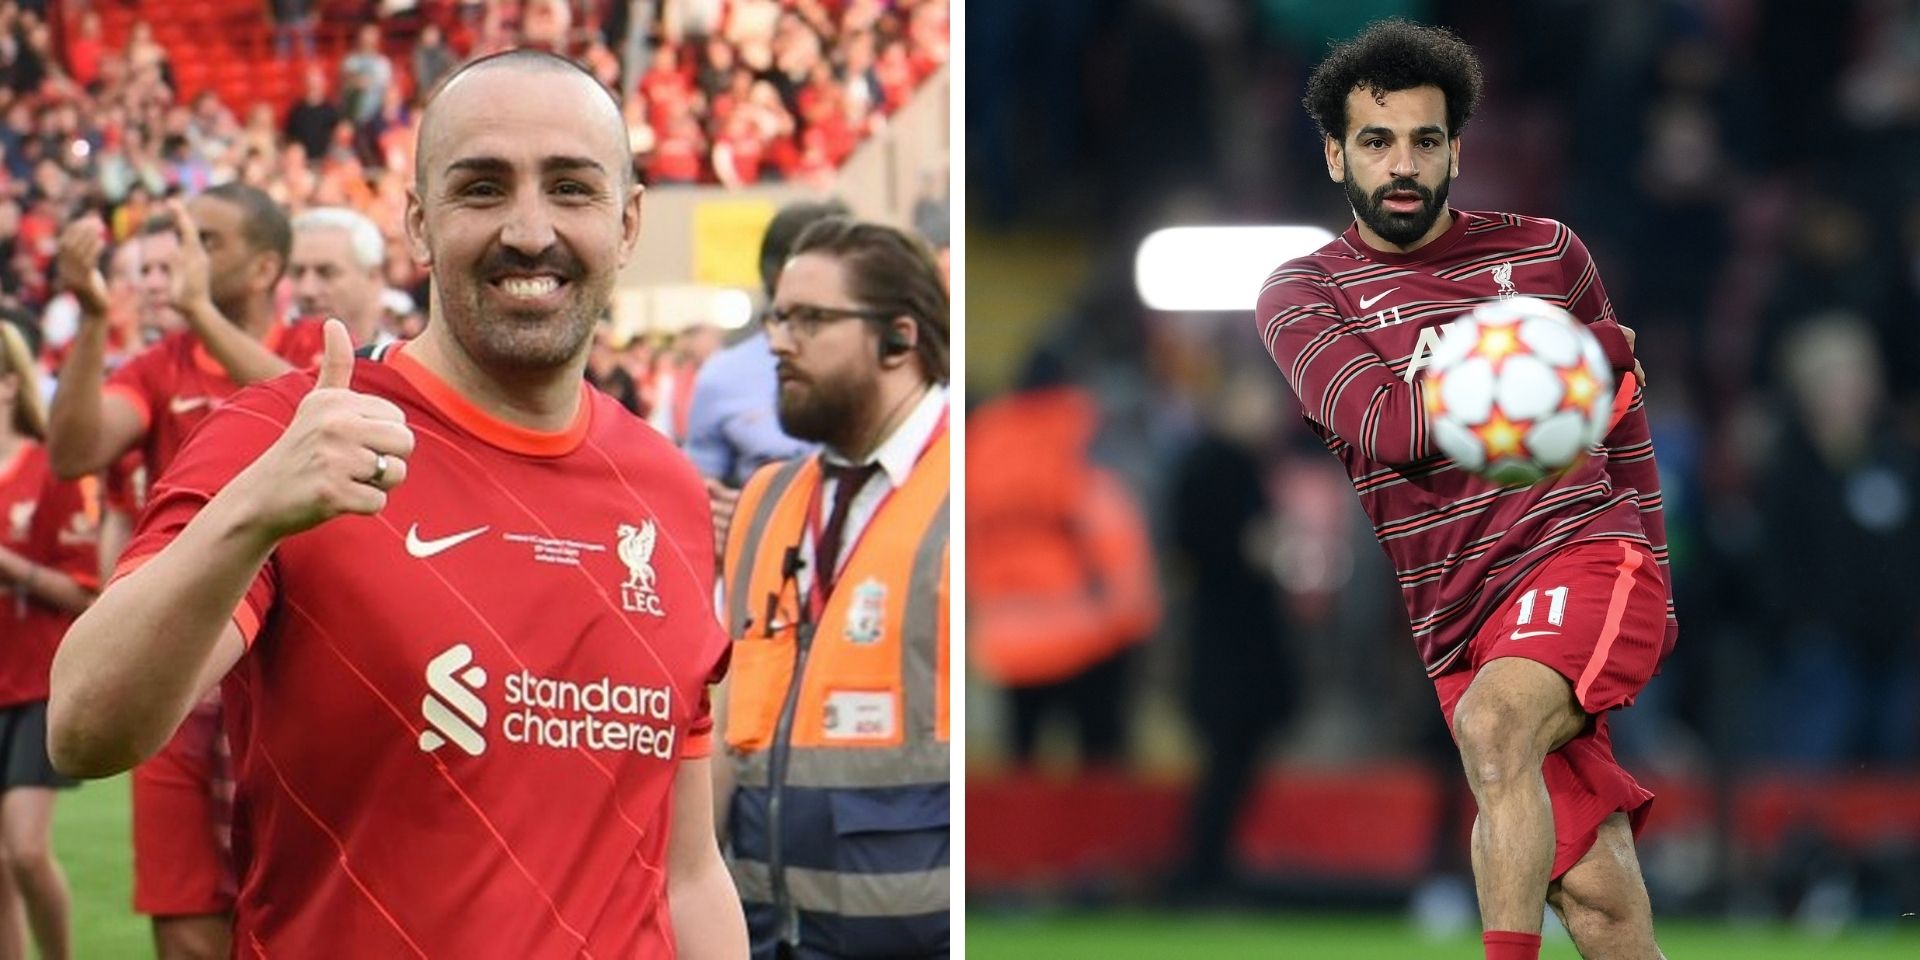 ‘I’m so happy I was wrong’ – Jose Enrique’s joy at Mo Salah’s contract extension and Liverpool’s ‘best signing this summer’